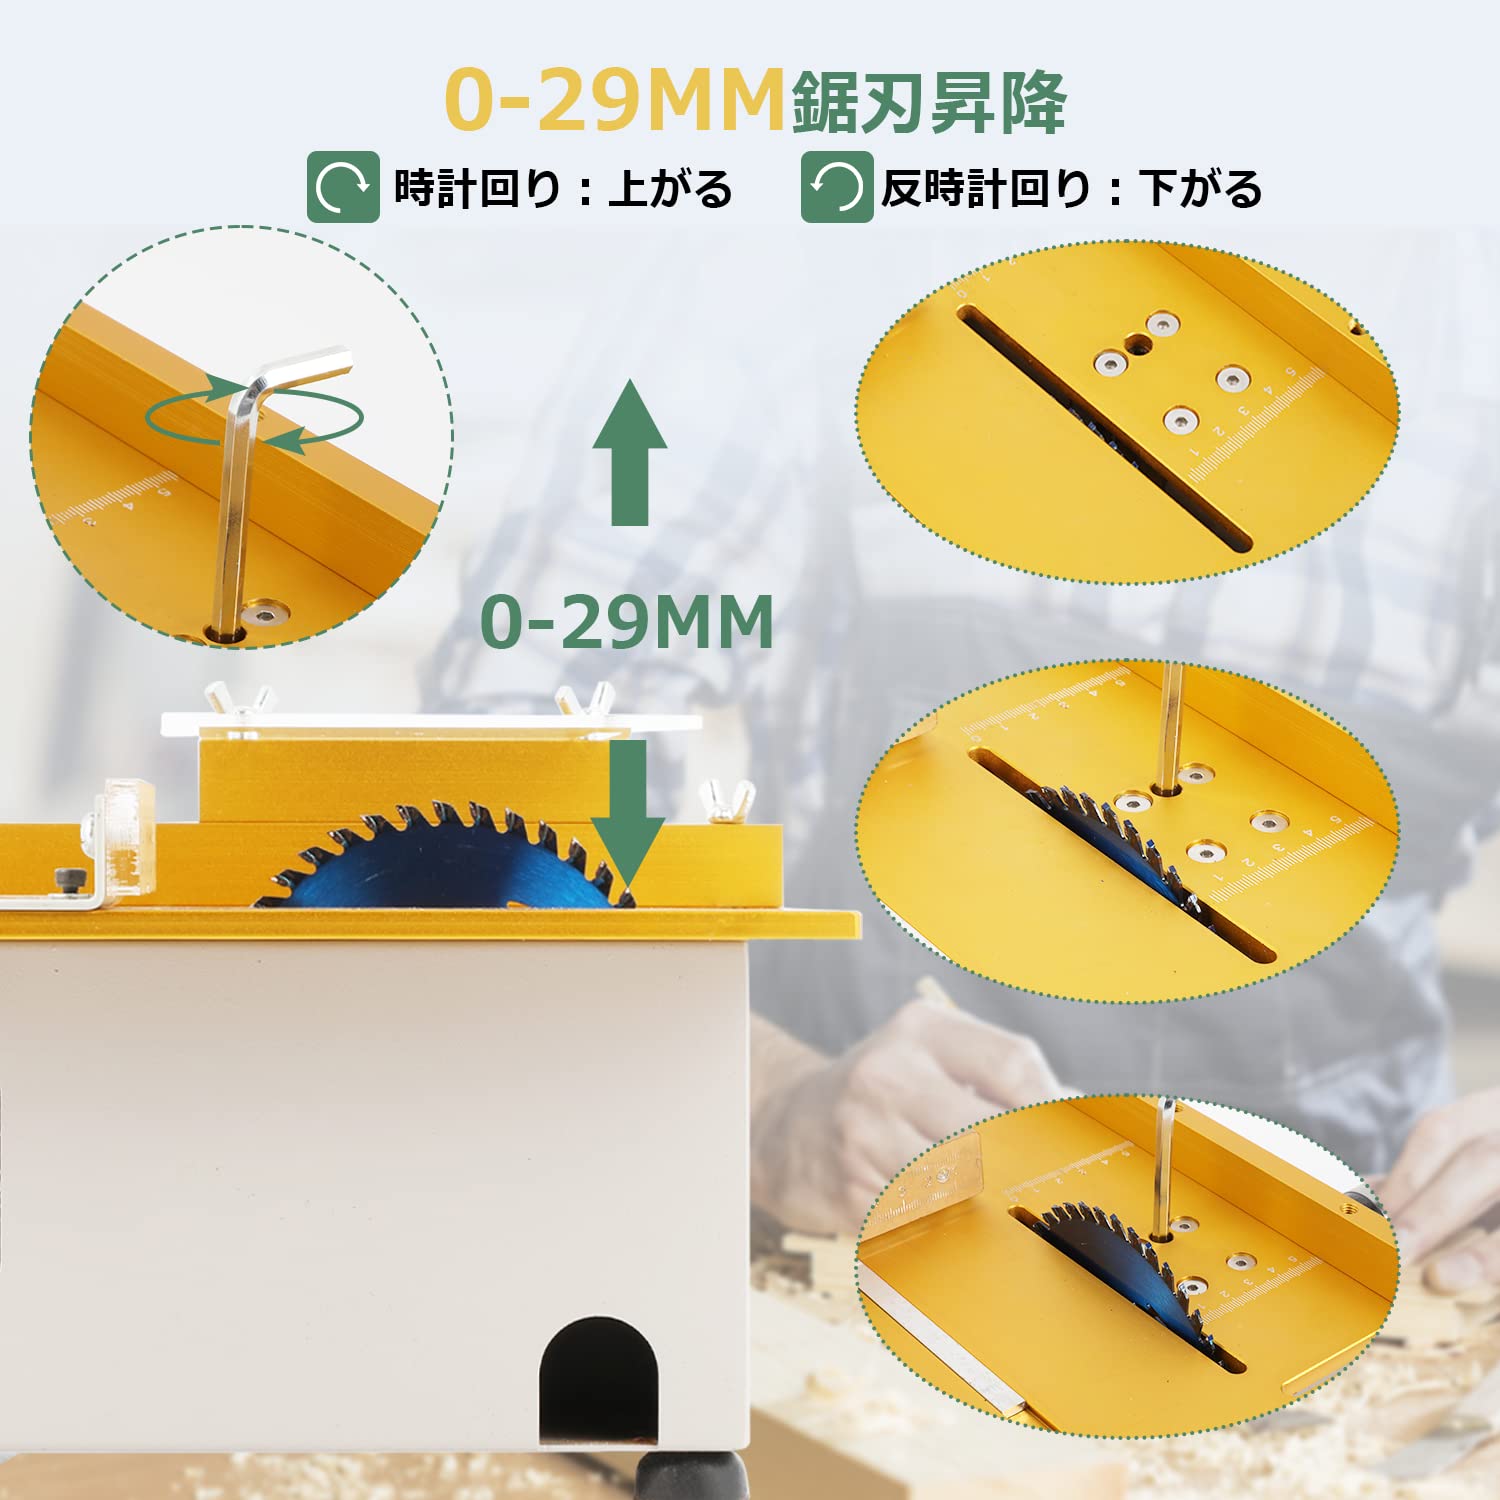 Huanyu Mini Table Saw 300W Powerful Cutting Tabletop Circular Saw 26-29mm For Hard Materials Wood/Substrate/Acrylic Saw Blade/With Drill Chuck Household DIY (Gold / 300W)